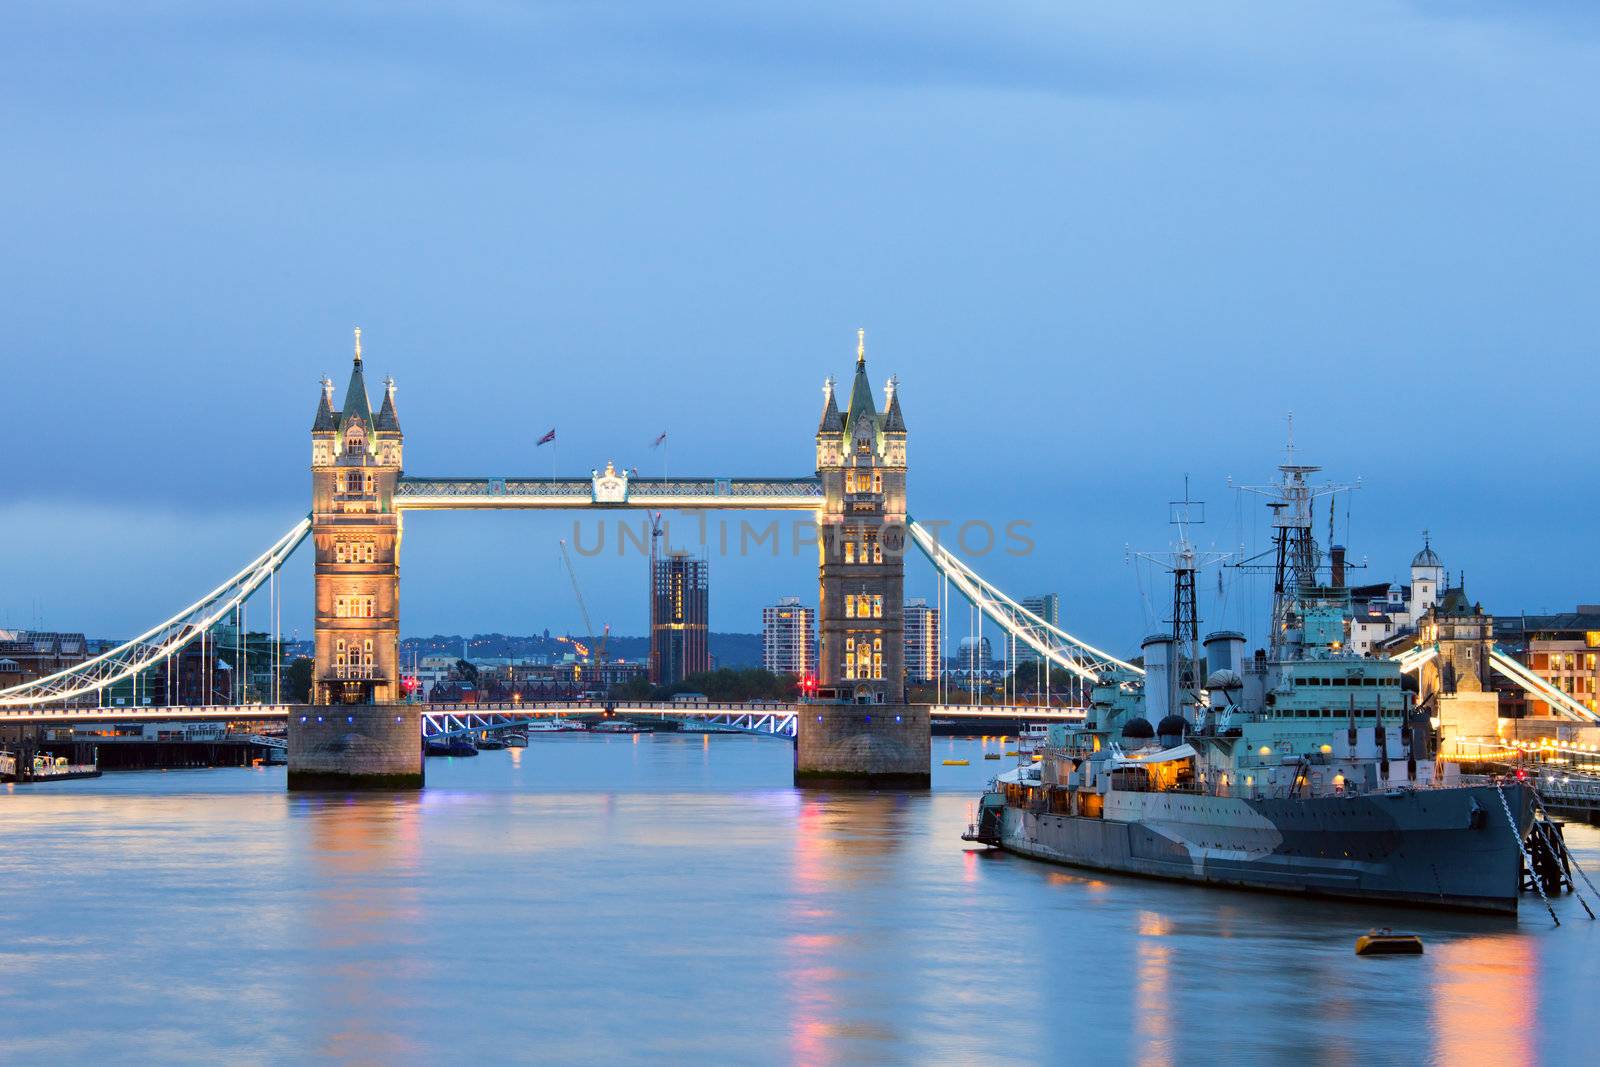 London cityscape with Tower Bridge and HMS Belfast at dusk